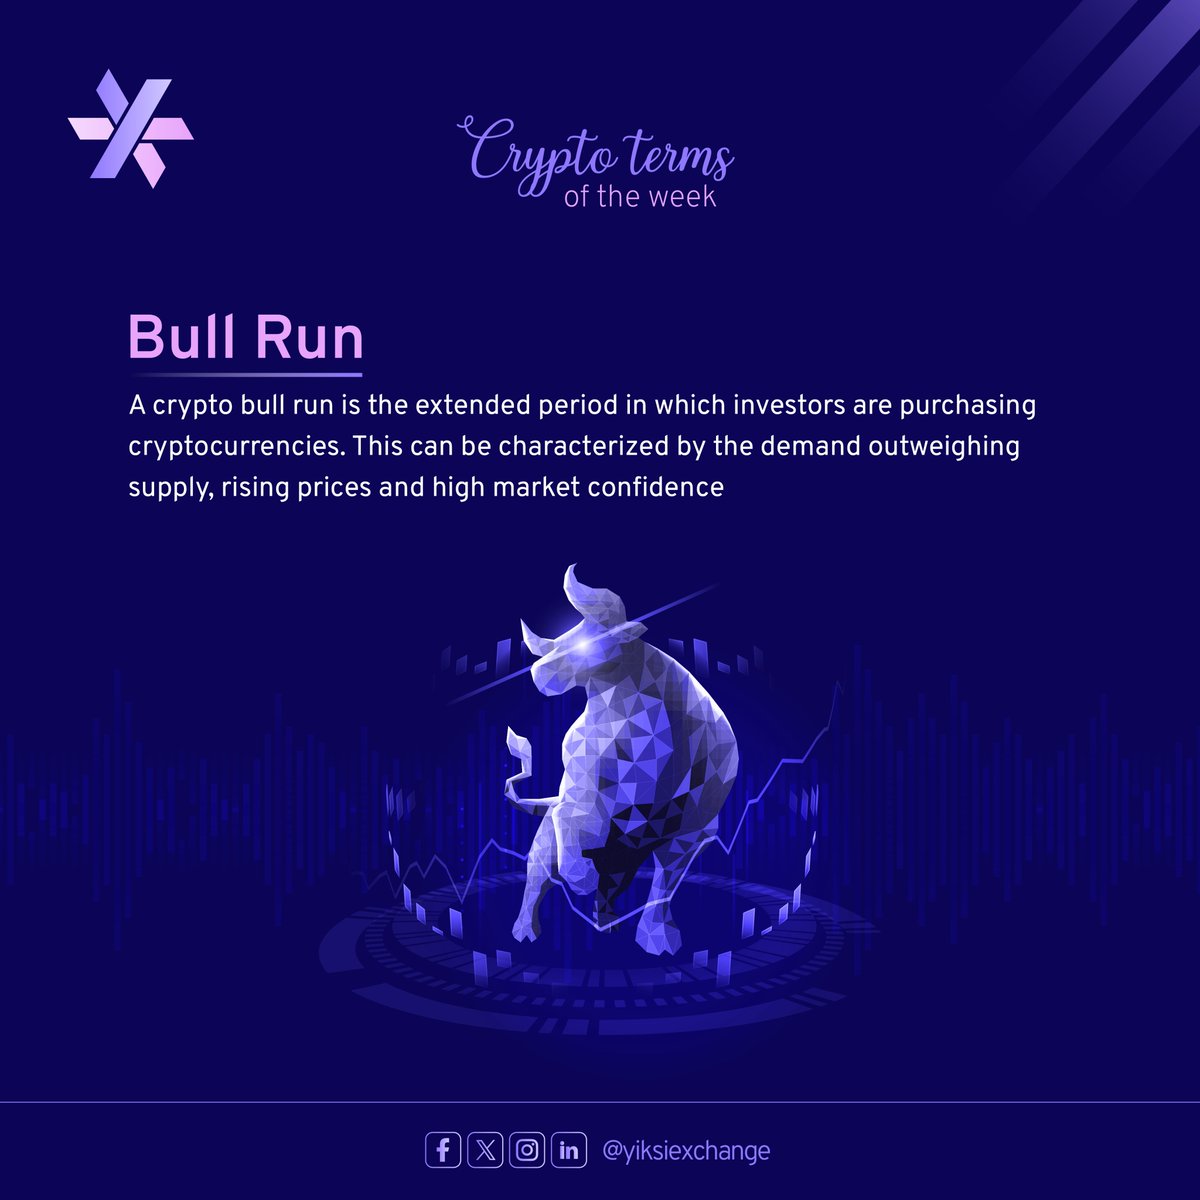 Crypto terms of the week : Bull Run
A crypto bull run is the extended period in which investors are purchasing cryptocurrencies.
This can be characterized by the demand outweighing supply, rising prices and high market confidence

#cryptoweek #yiksiexchange